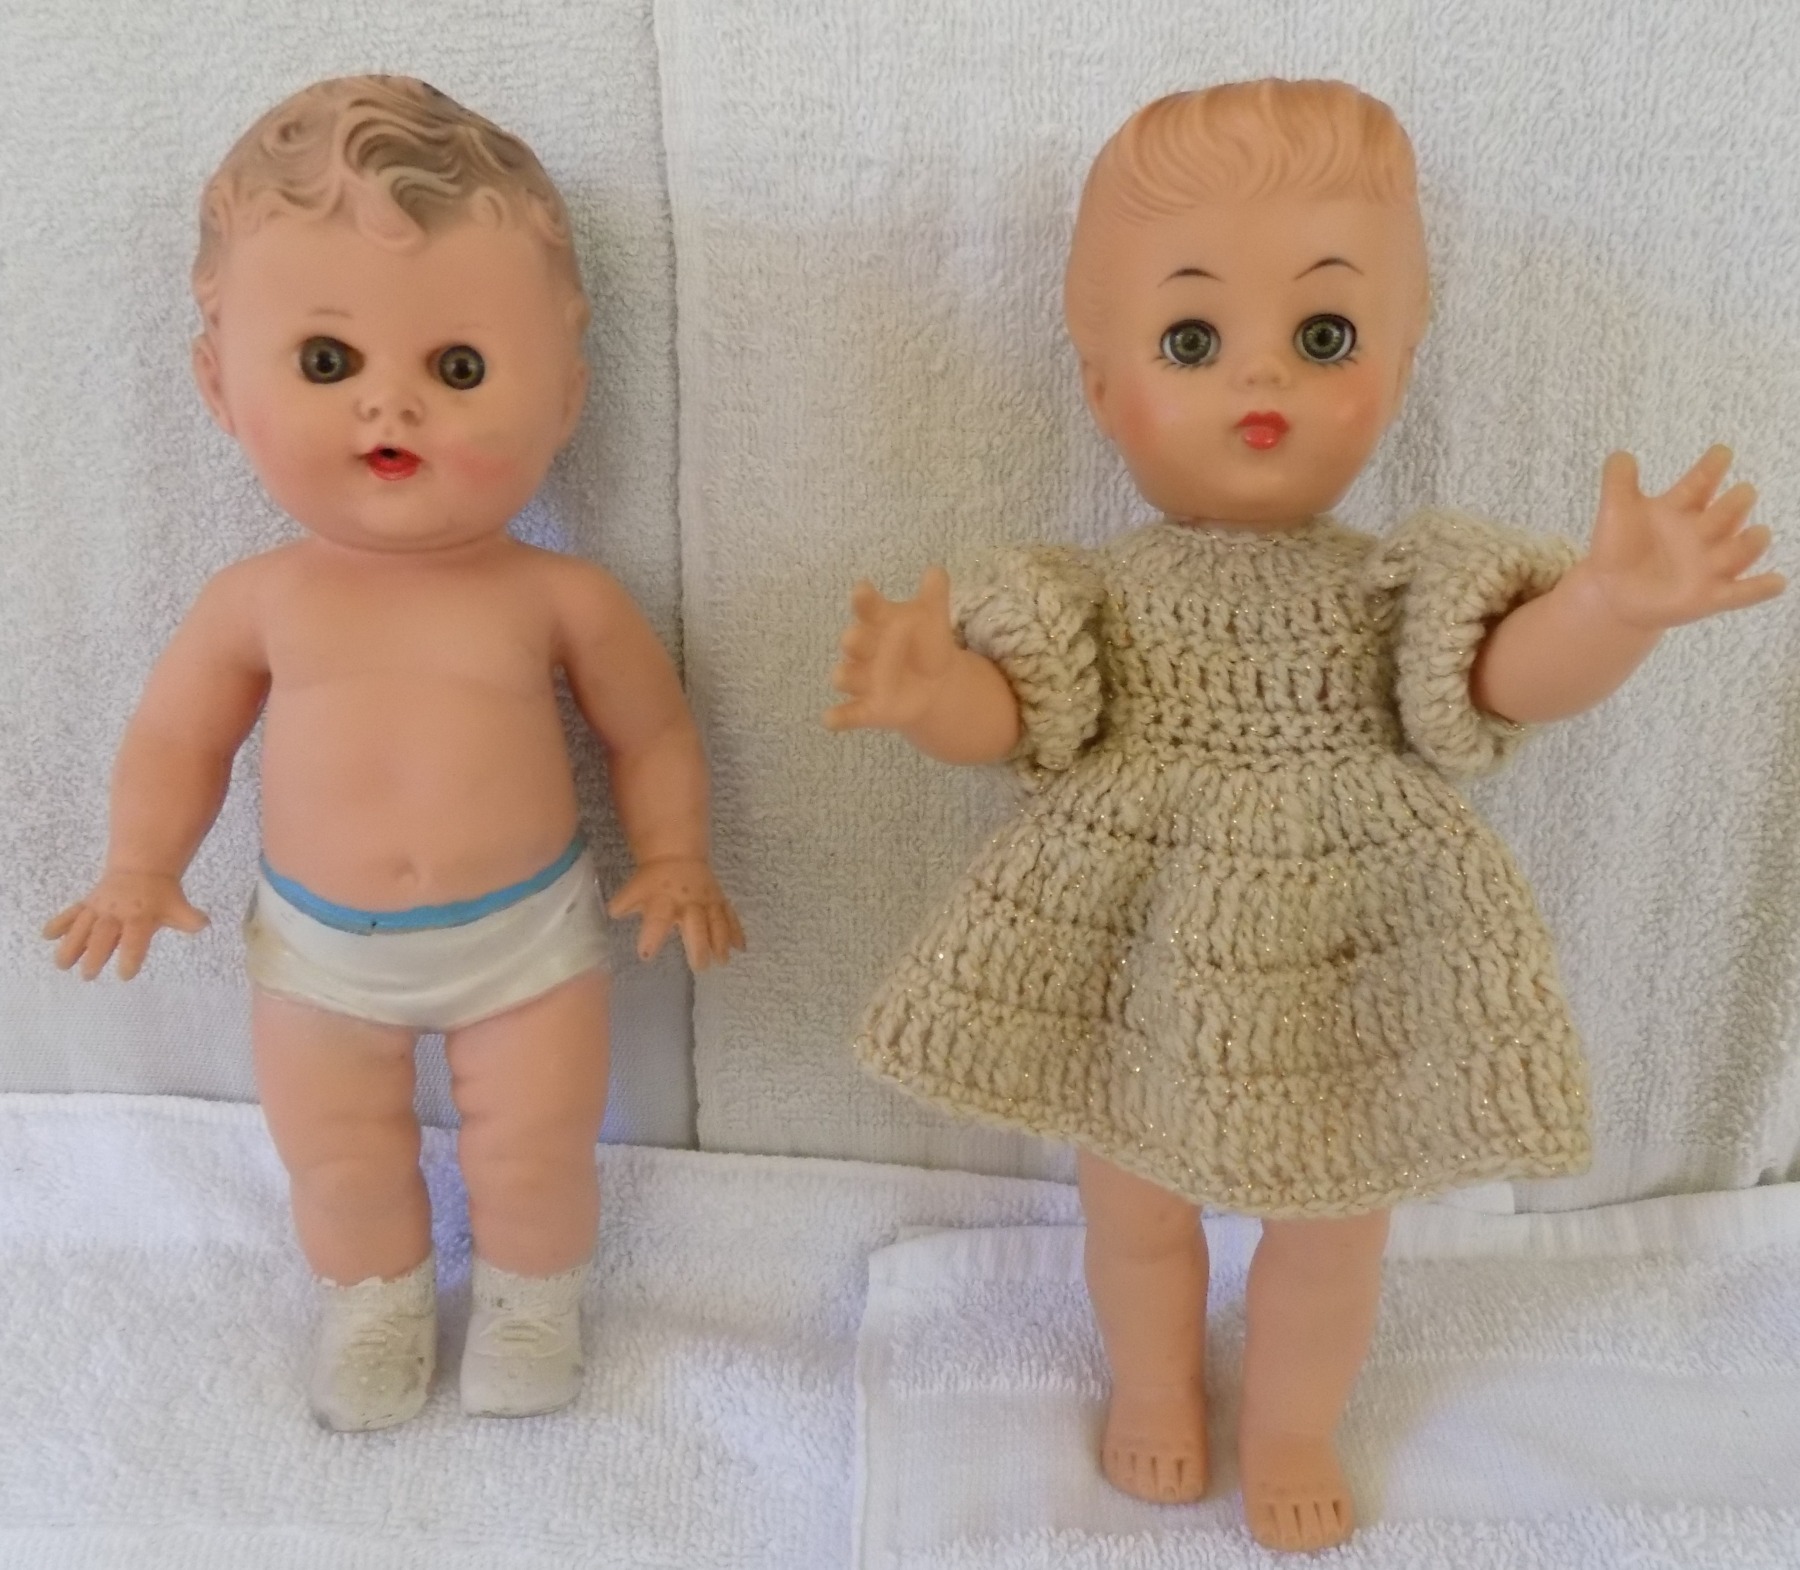 Moderator Komst Betrouwbaar Pair of Vintage Rubber Dolls #2 - Timeless Treasures and Collectibles